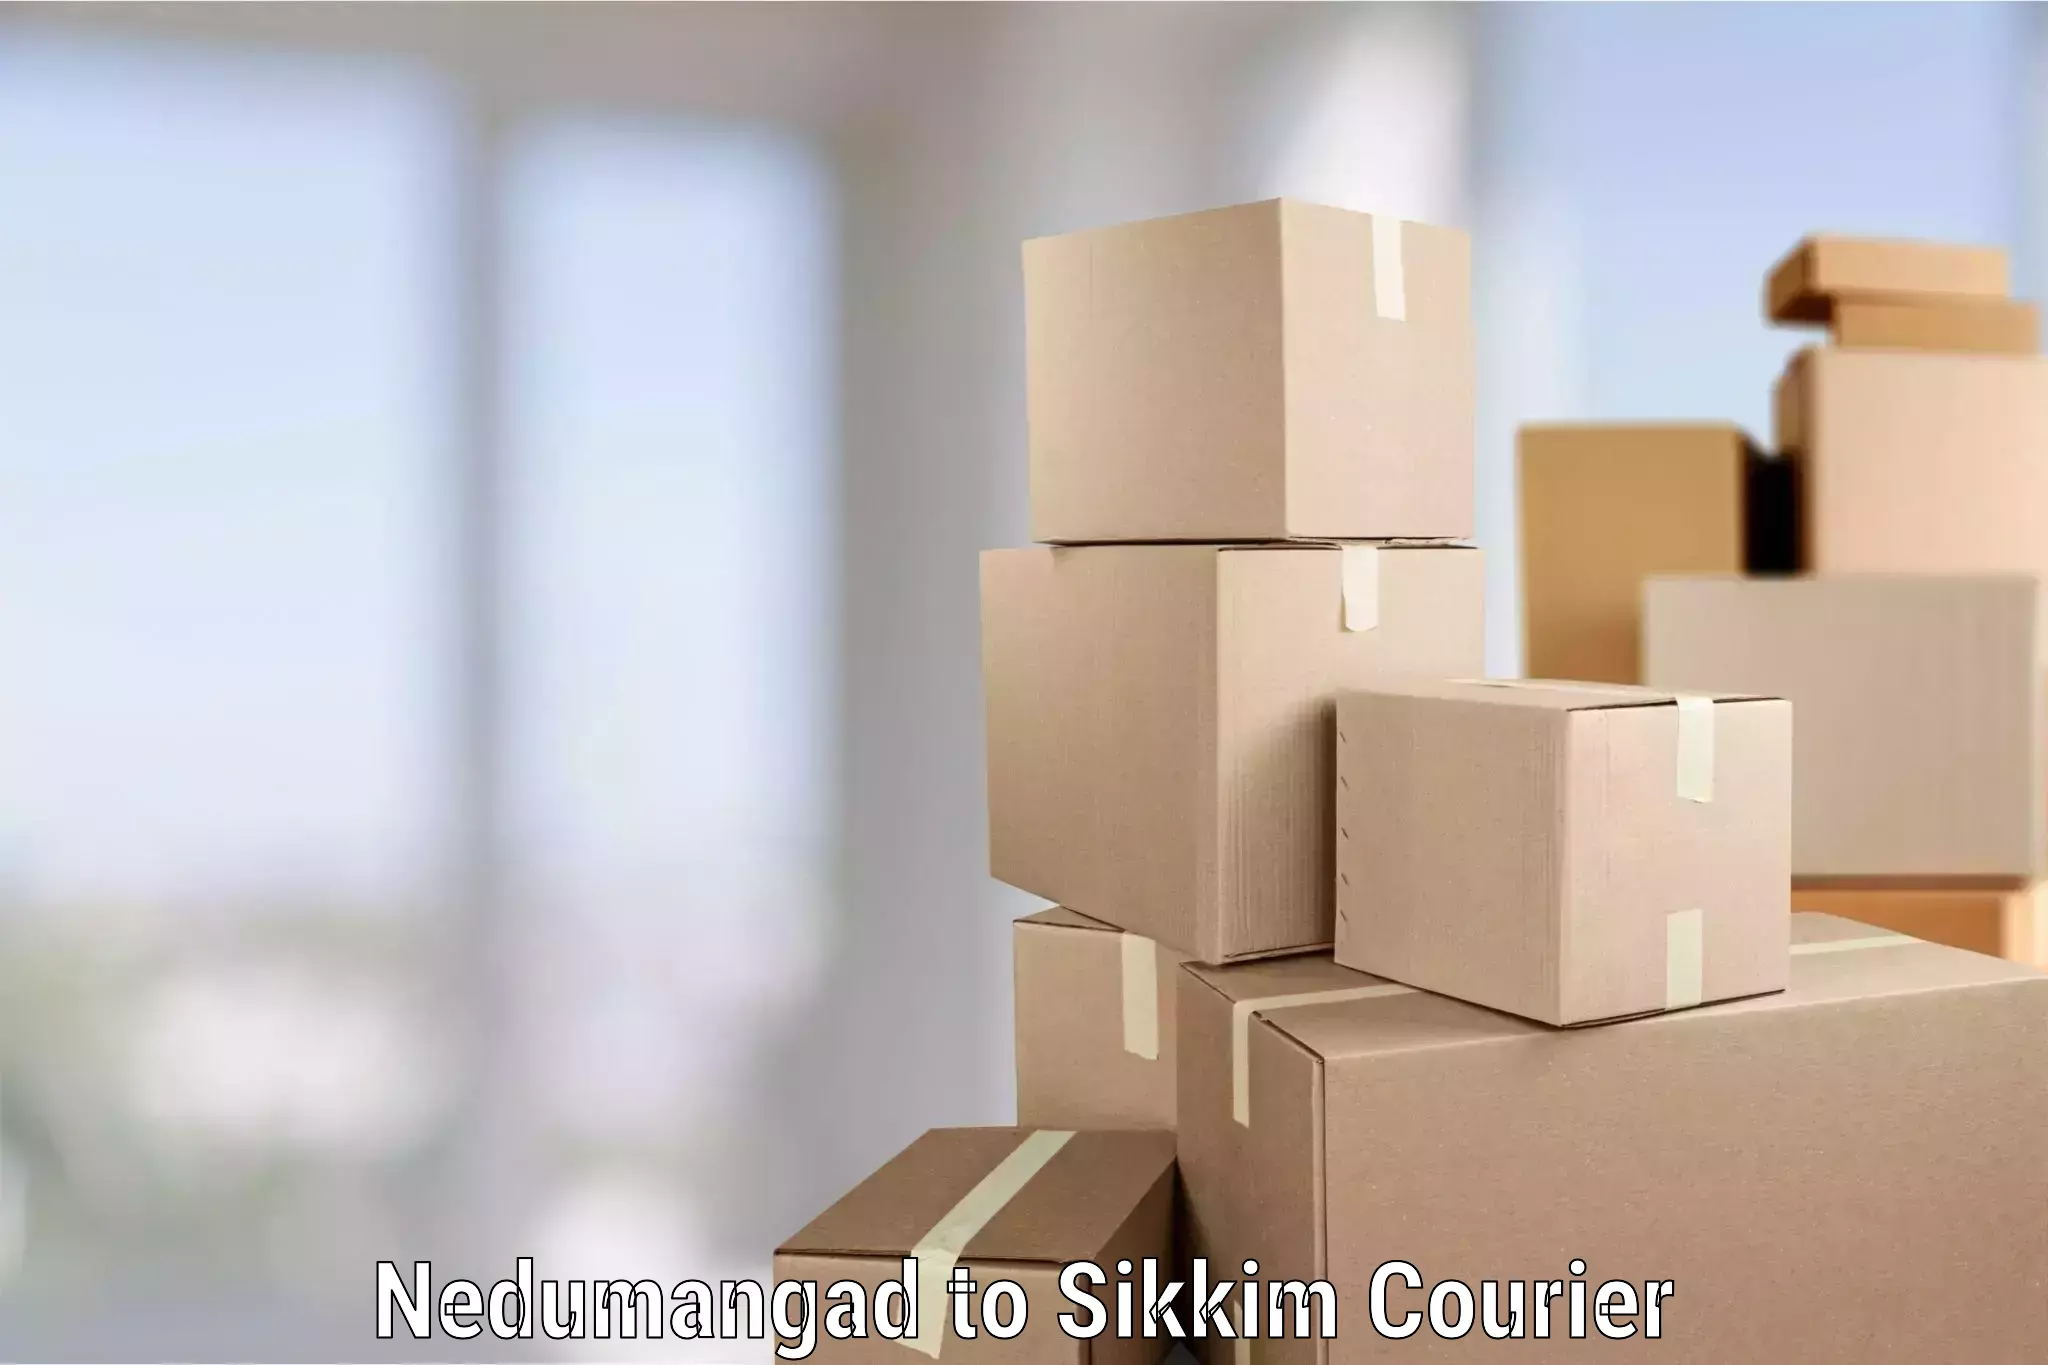 Trusted relocation experts Nedumangad to Sikkim